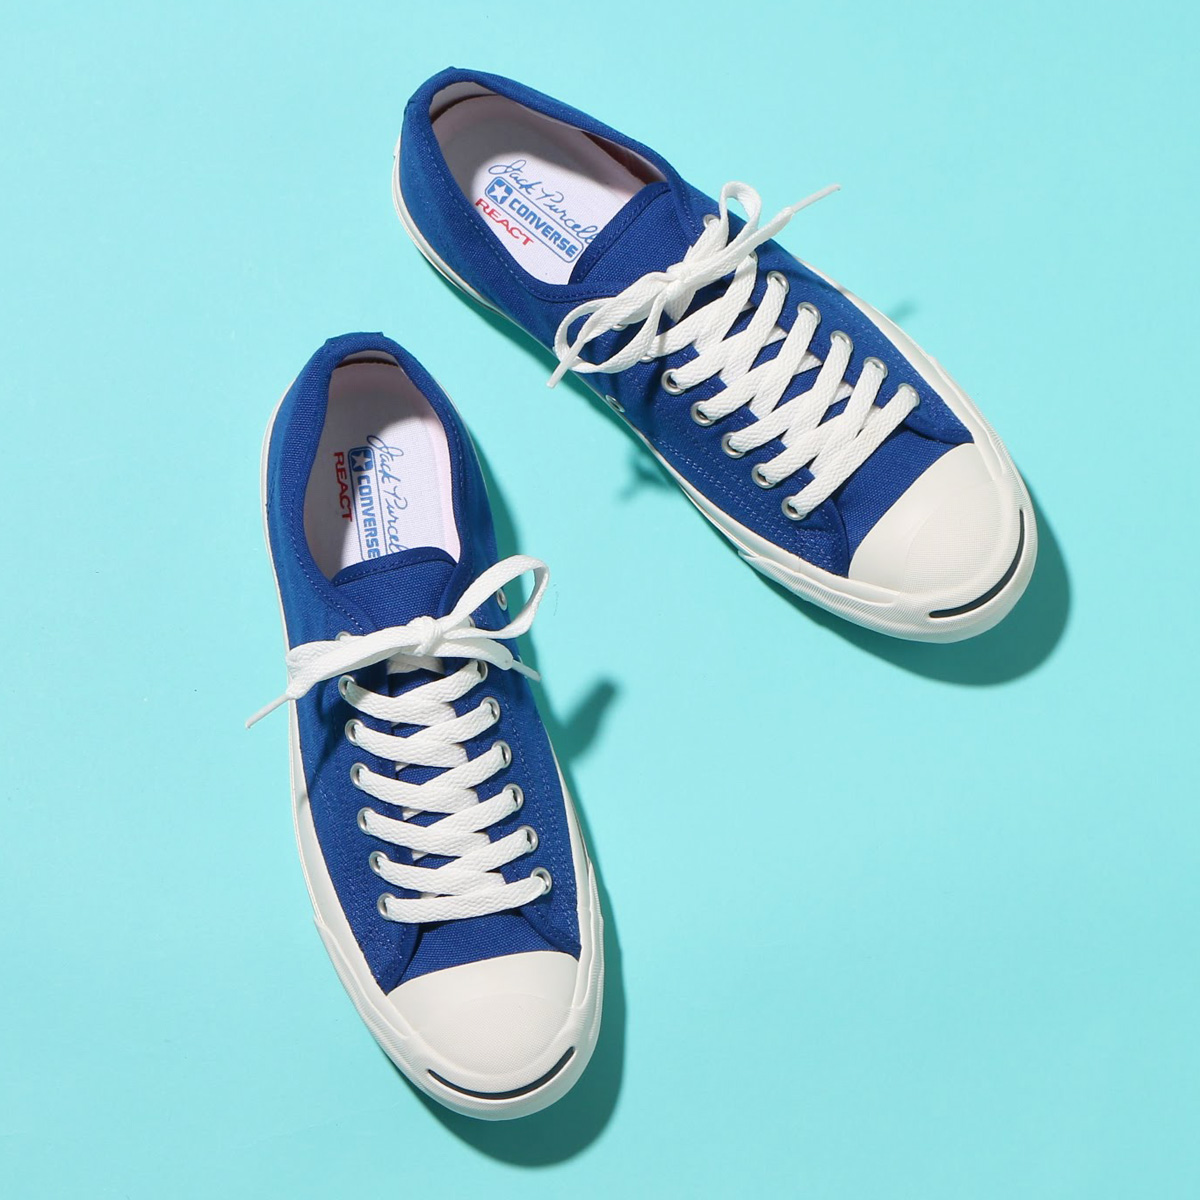 converse jack purcell colors